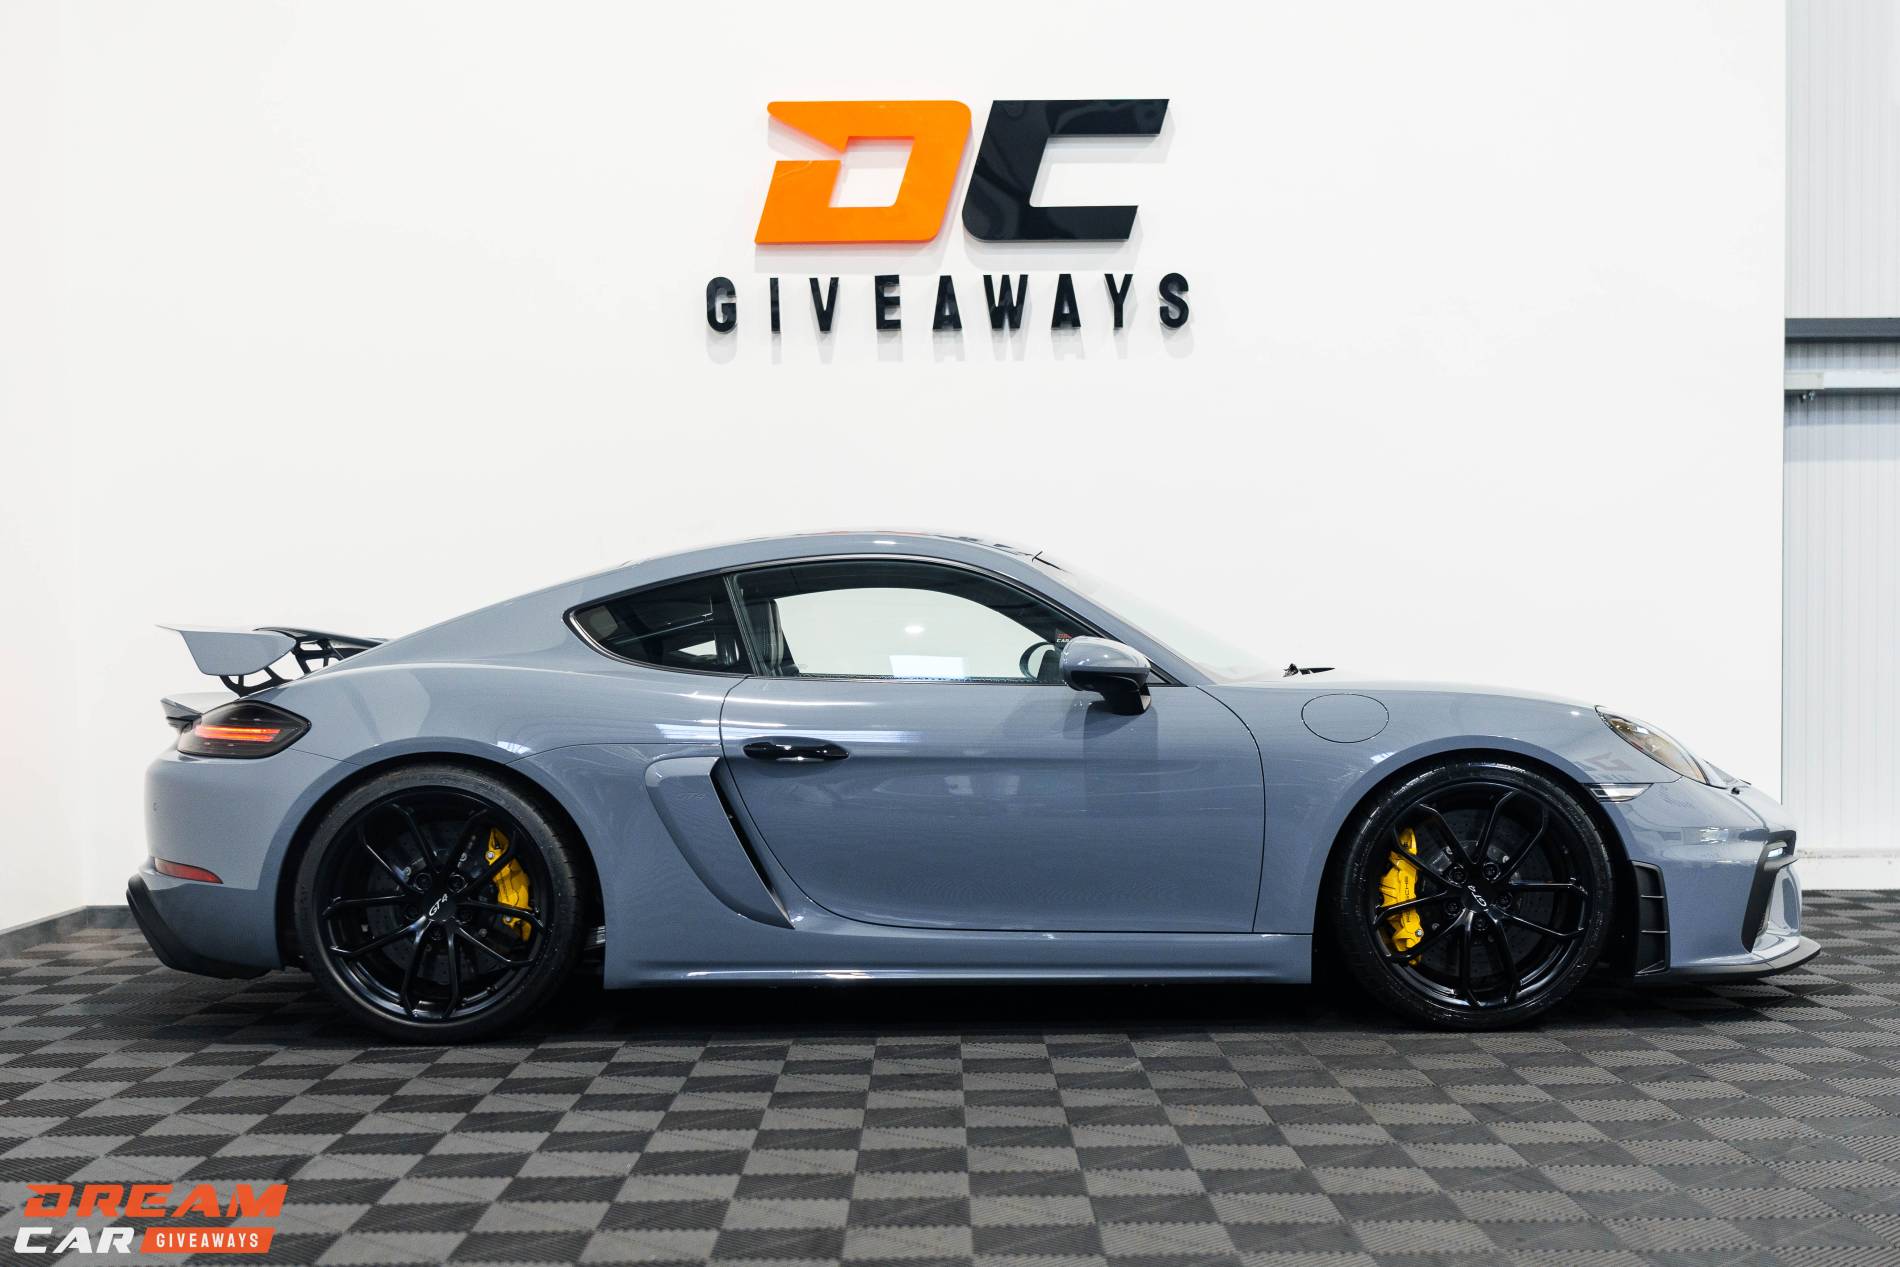 Win this Cayman GT4 & Audi RS3 Sportback & £5,000 or £135,000 Tax Free